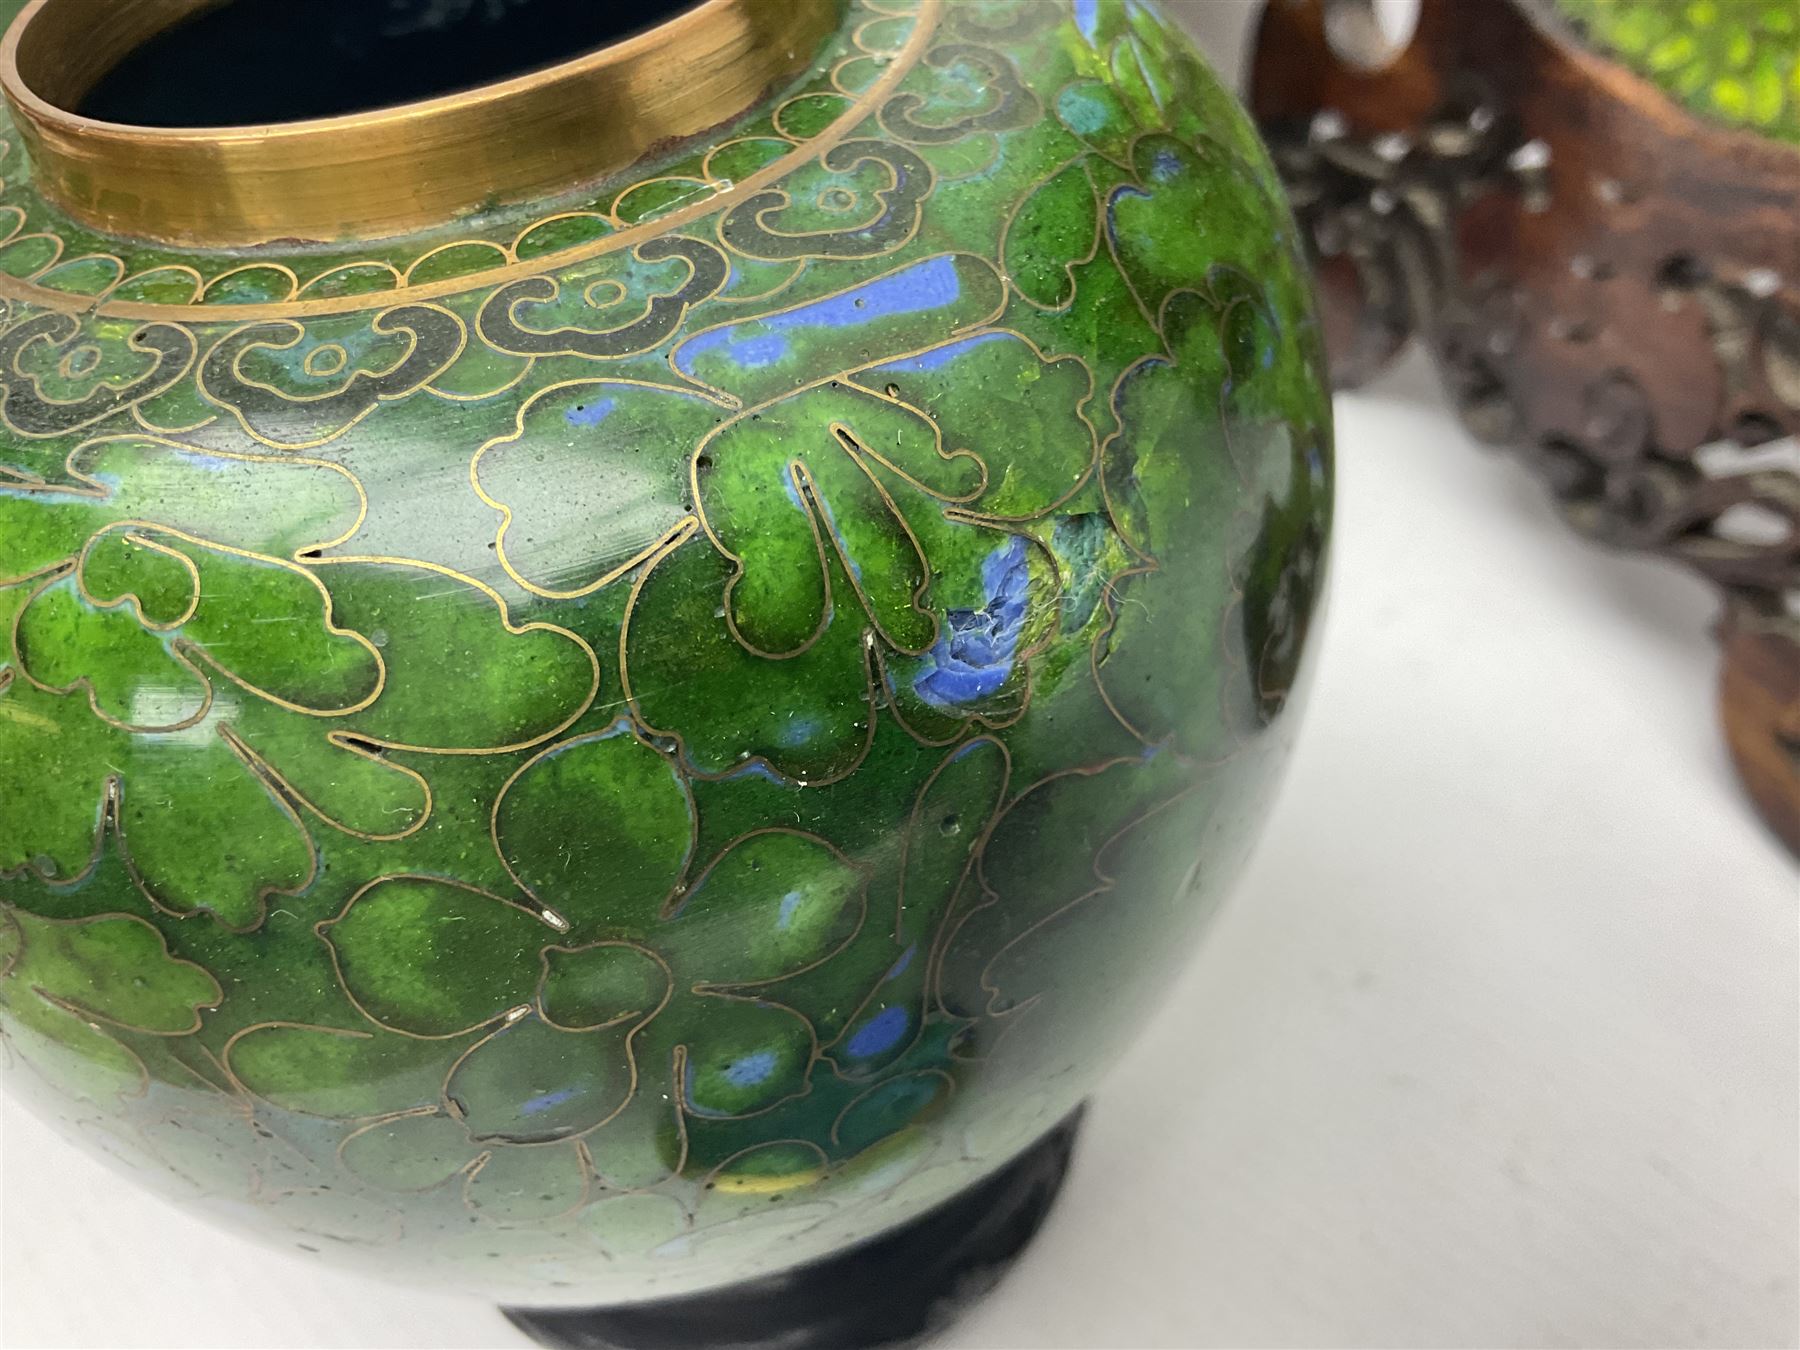 Pair of modern cloisonne ginger jars having floral decoration with a green ground - Image 4 of 13